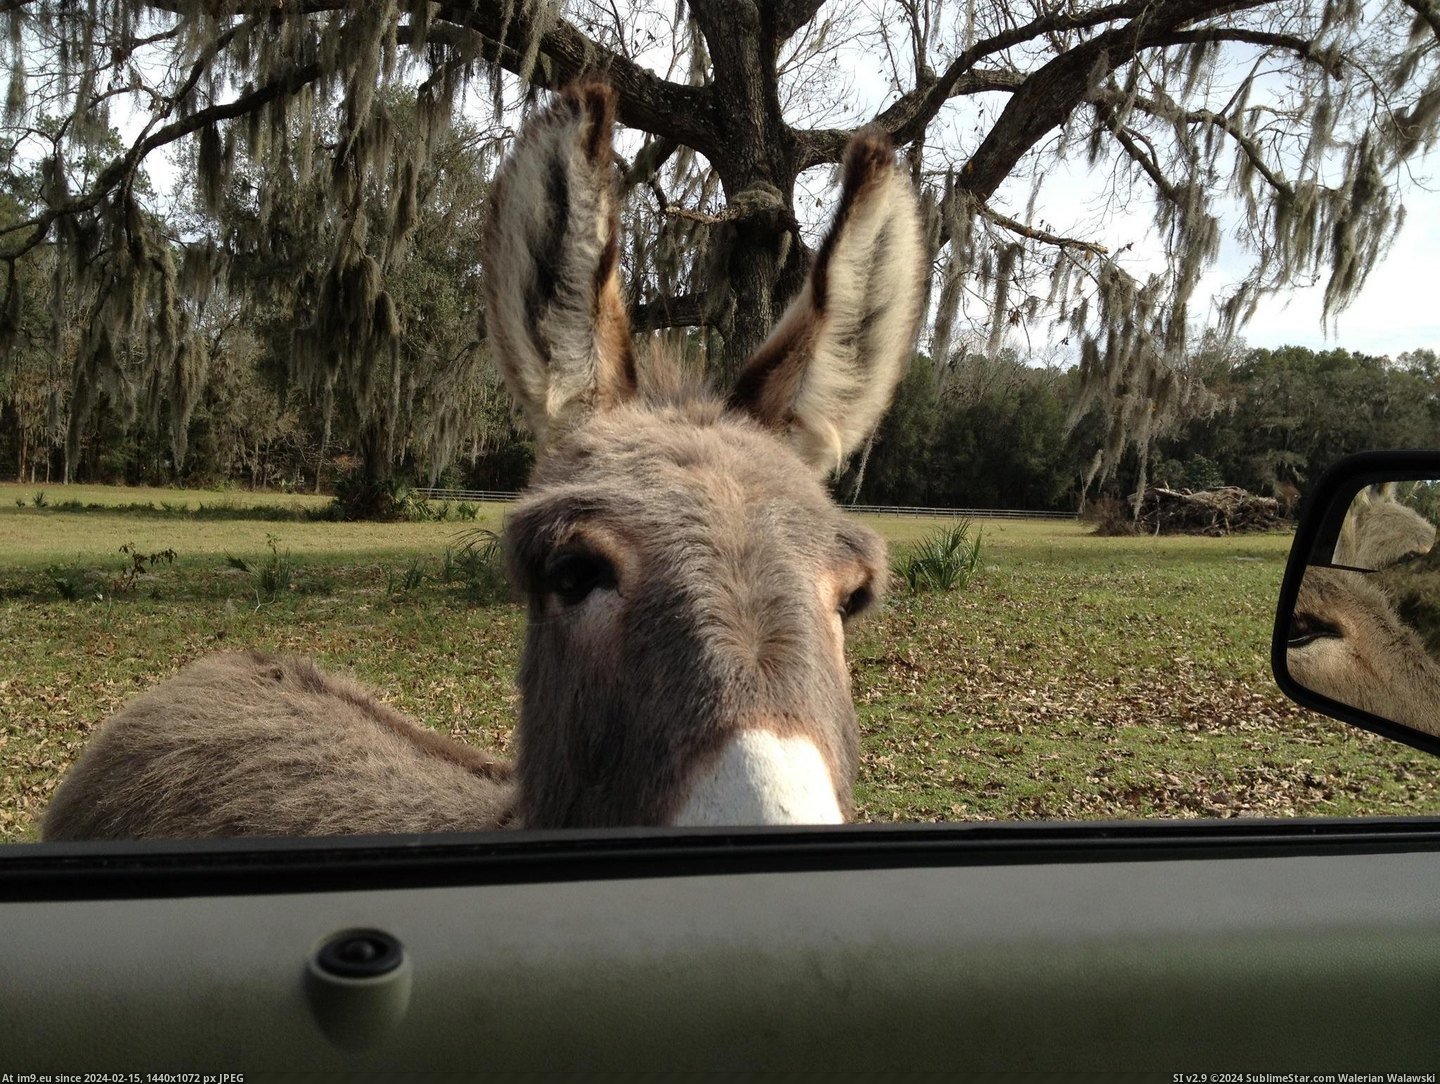 #Funny #Head #Mini #Scratch #Donkey #Neighbor #Chase #Driveway [Funny] My neighbor has a mini donkey that will chase you up the driveway until you scratch his head. 1 Pic. (Bild von album My r/FUNNY favs))